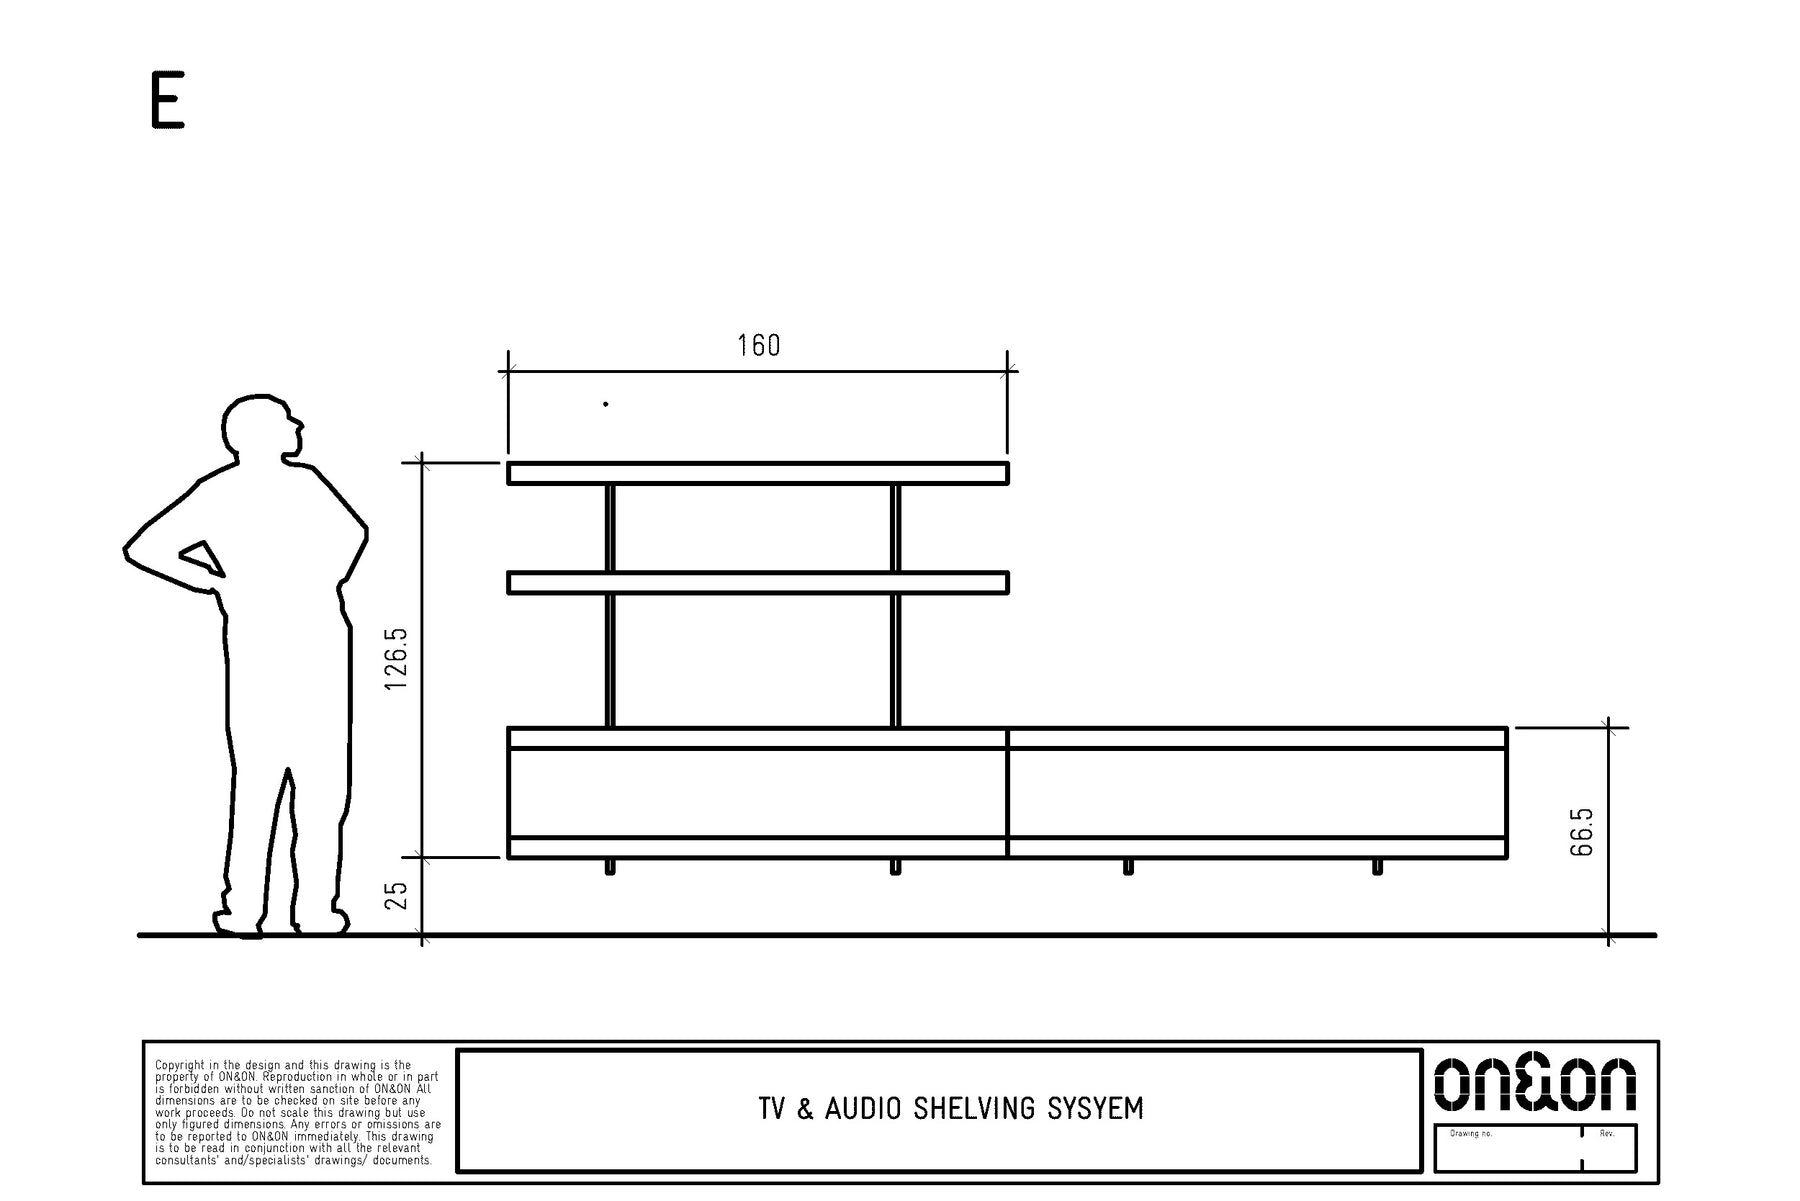 TV shelving unit E drawing wall mounted with shelves